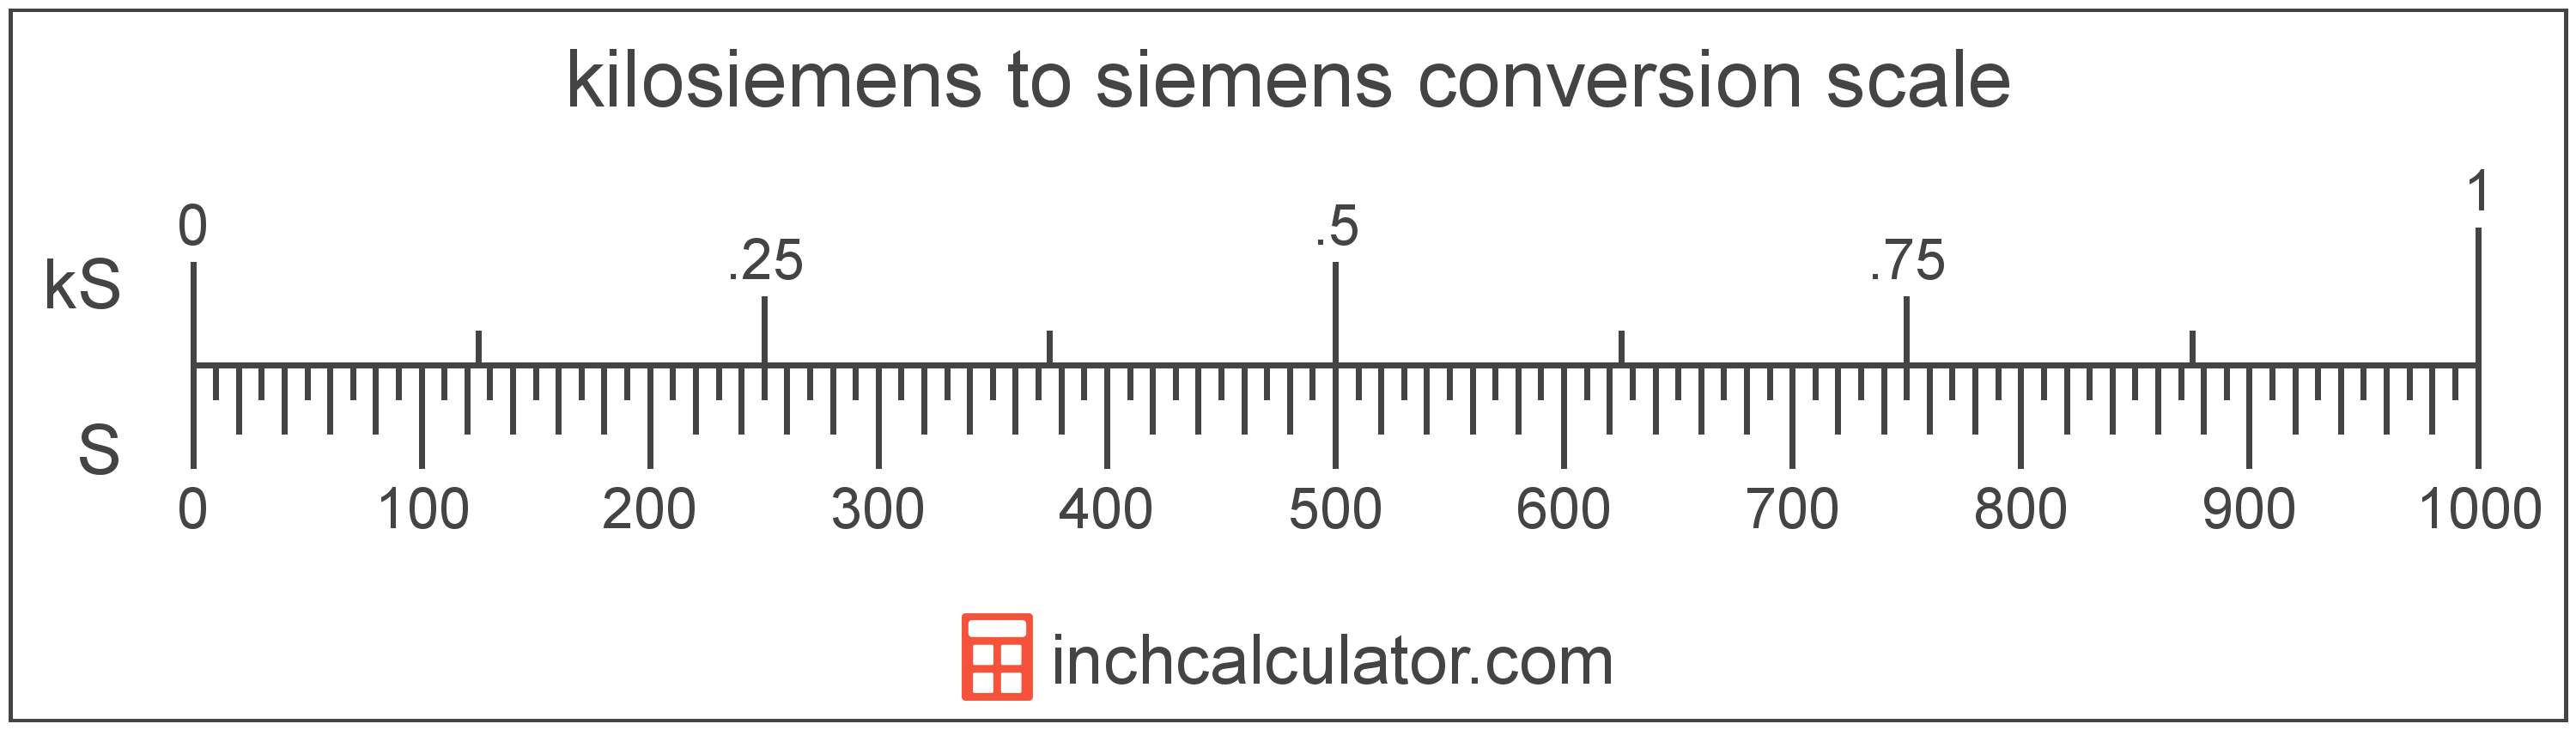 conversion scale showing kilosiemens and equivalent siemens electrical conductance values